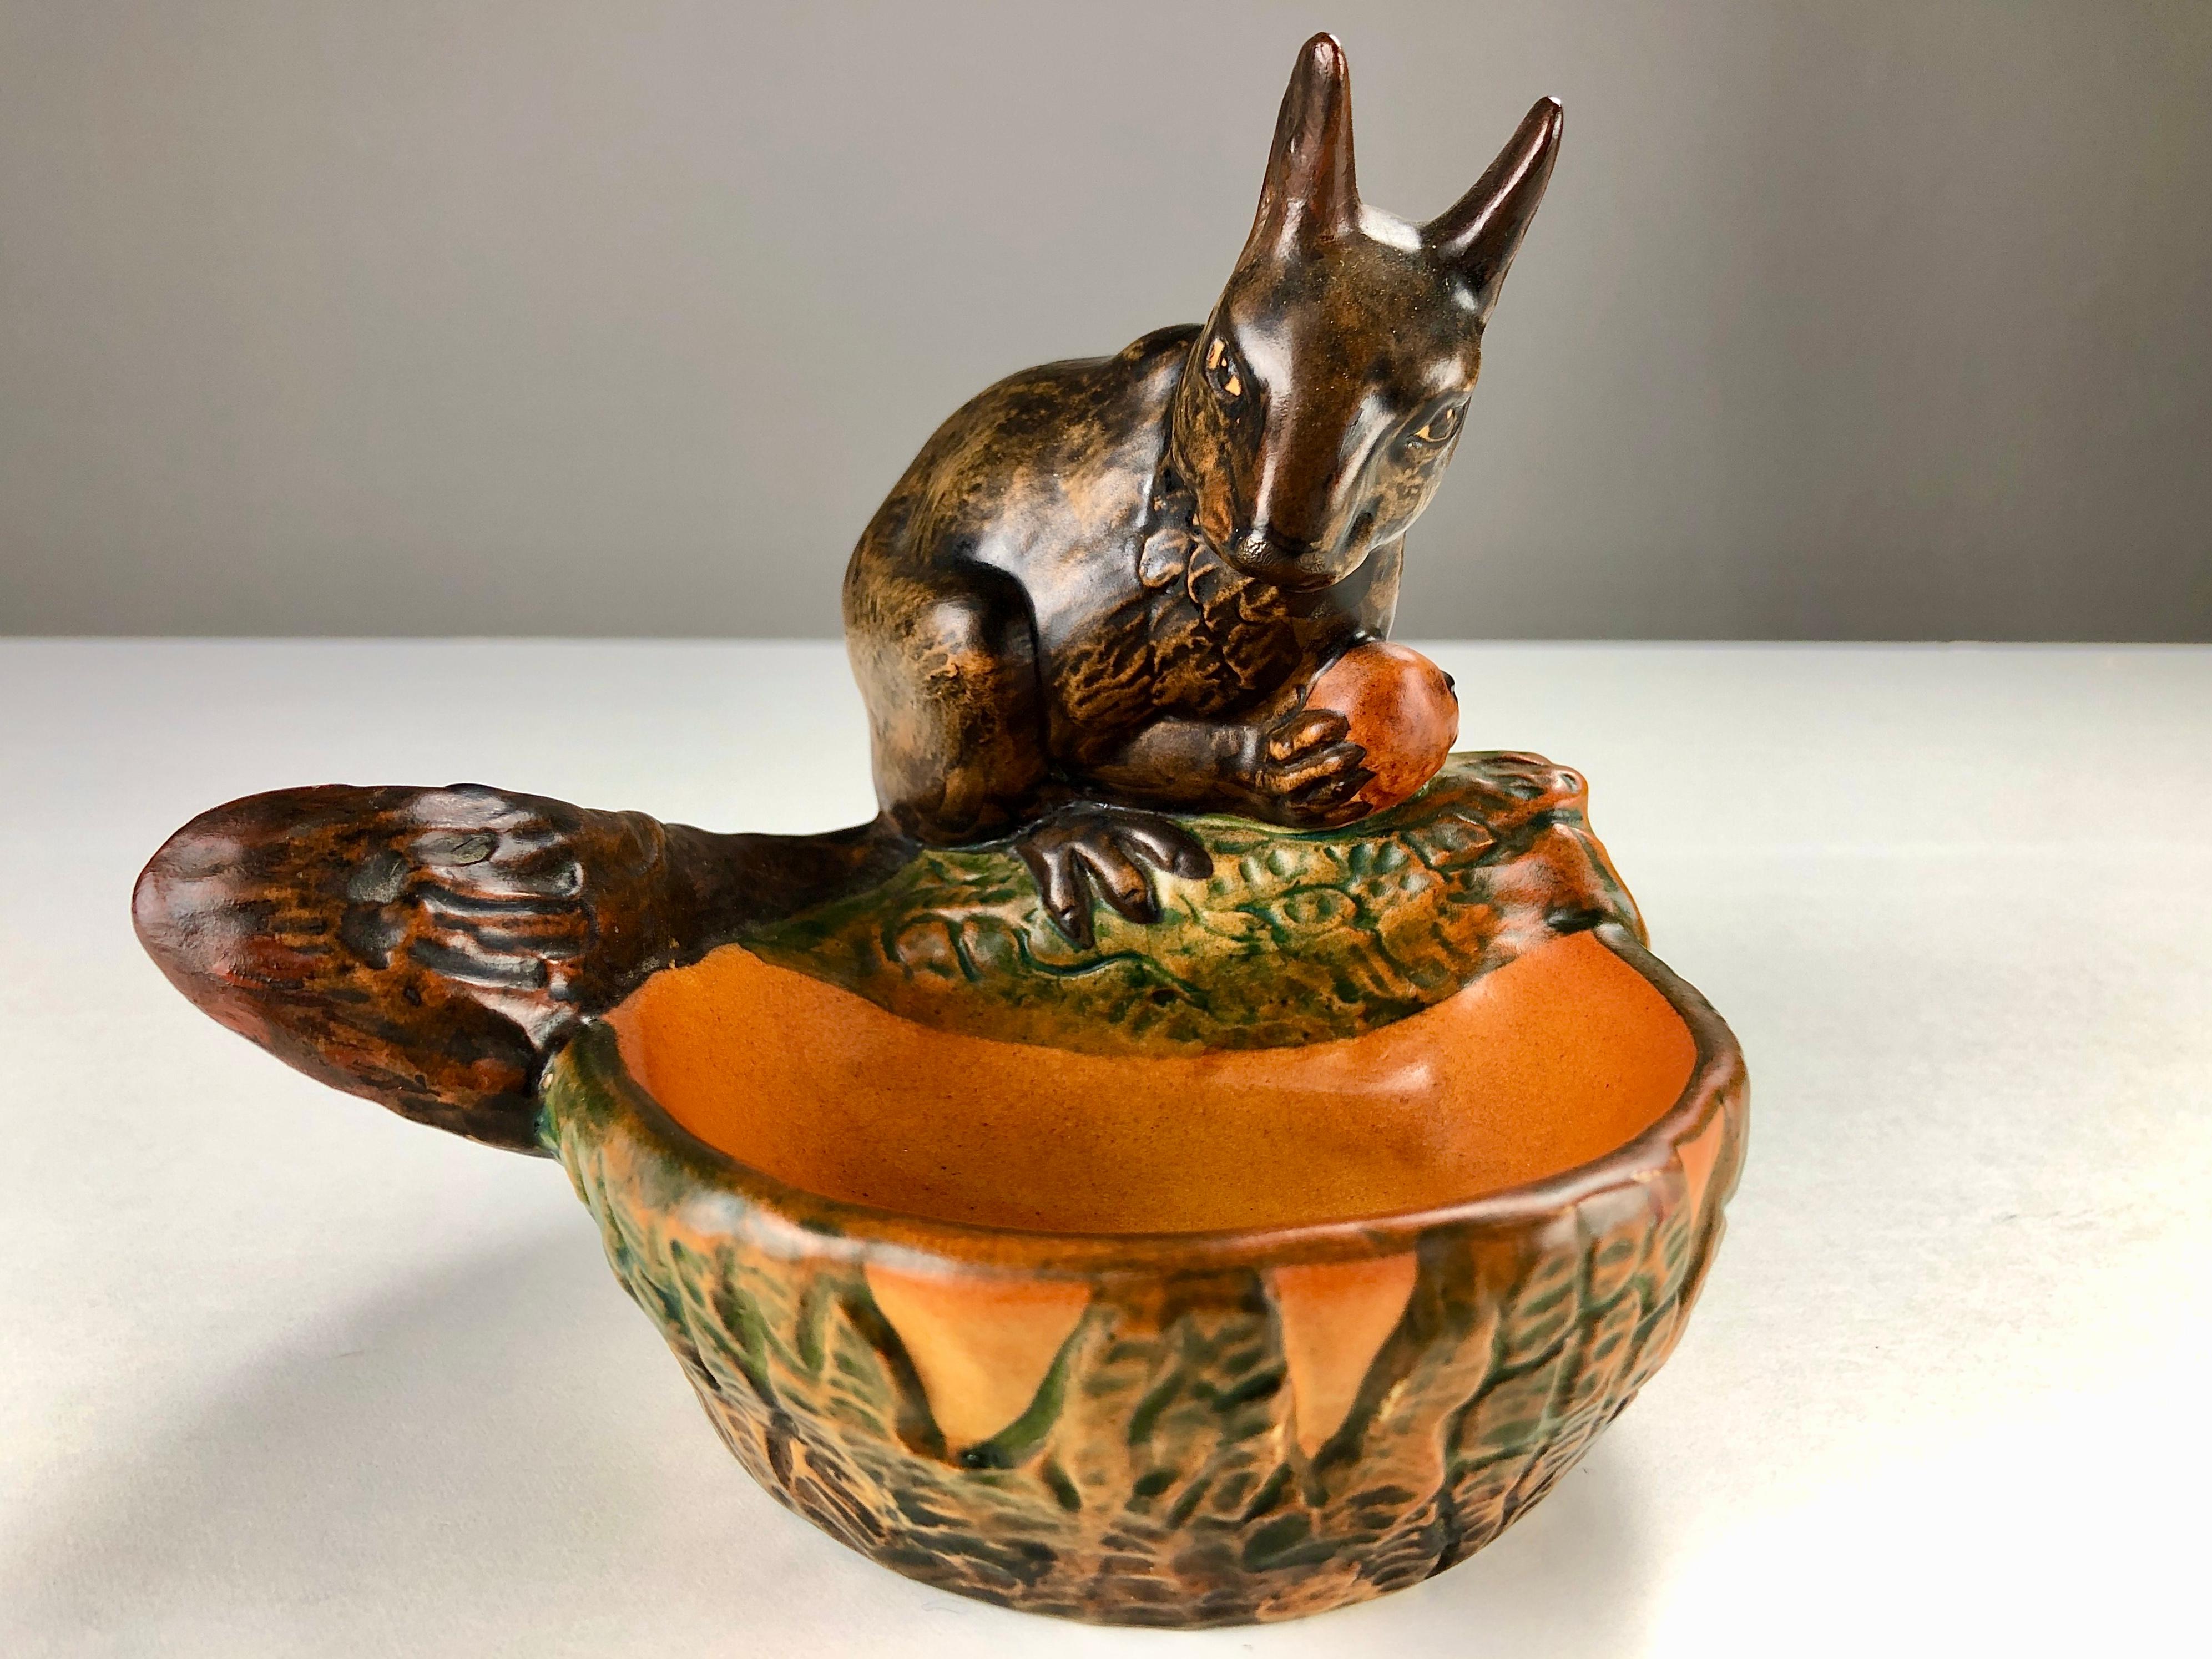 Hand -crafted Danish Art Nouveau ash tray / bowl designed by Axel Sørensen in 1927 for Ipsens Enke.

The art nuveau ash tray / bowl feature a well made lively squirrel and is in excellent condition.

Ipsens Enke (1843 - 1955) was a very succesfull